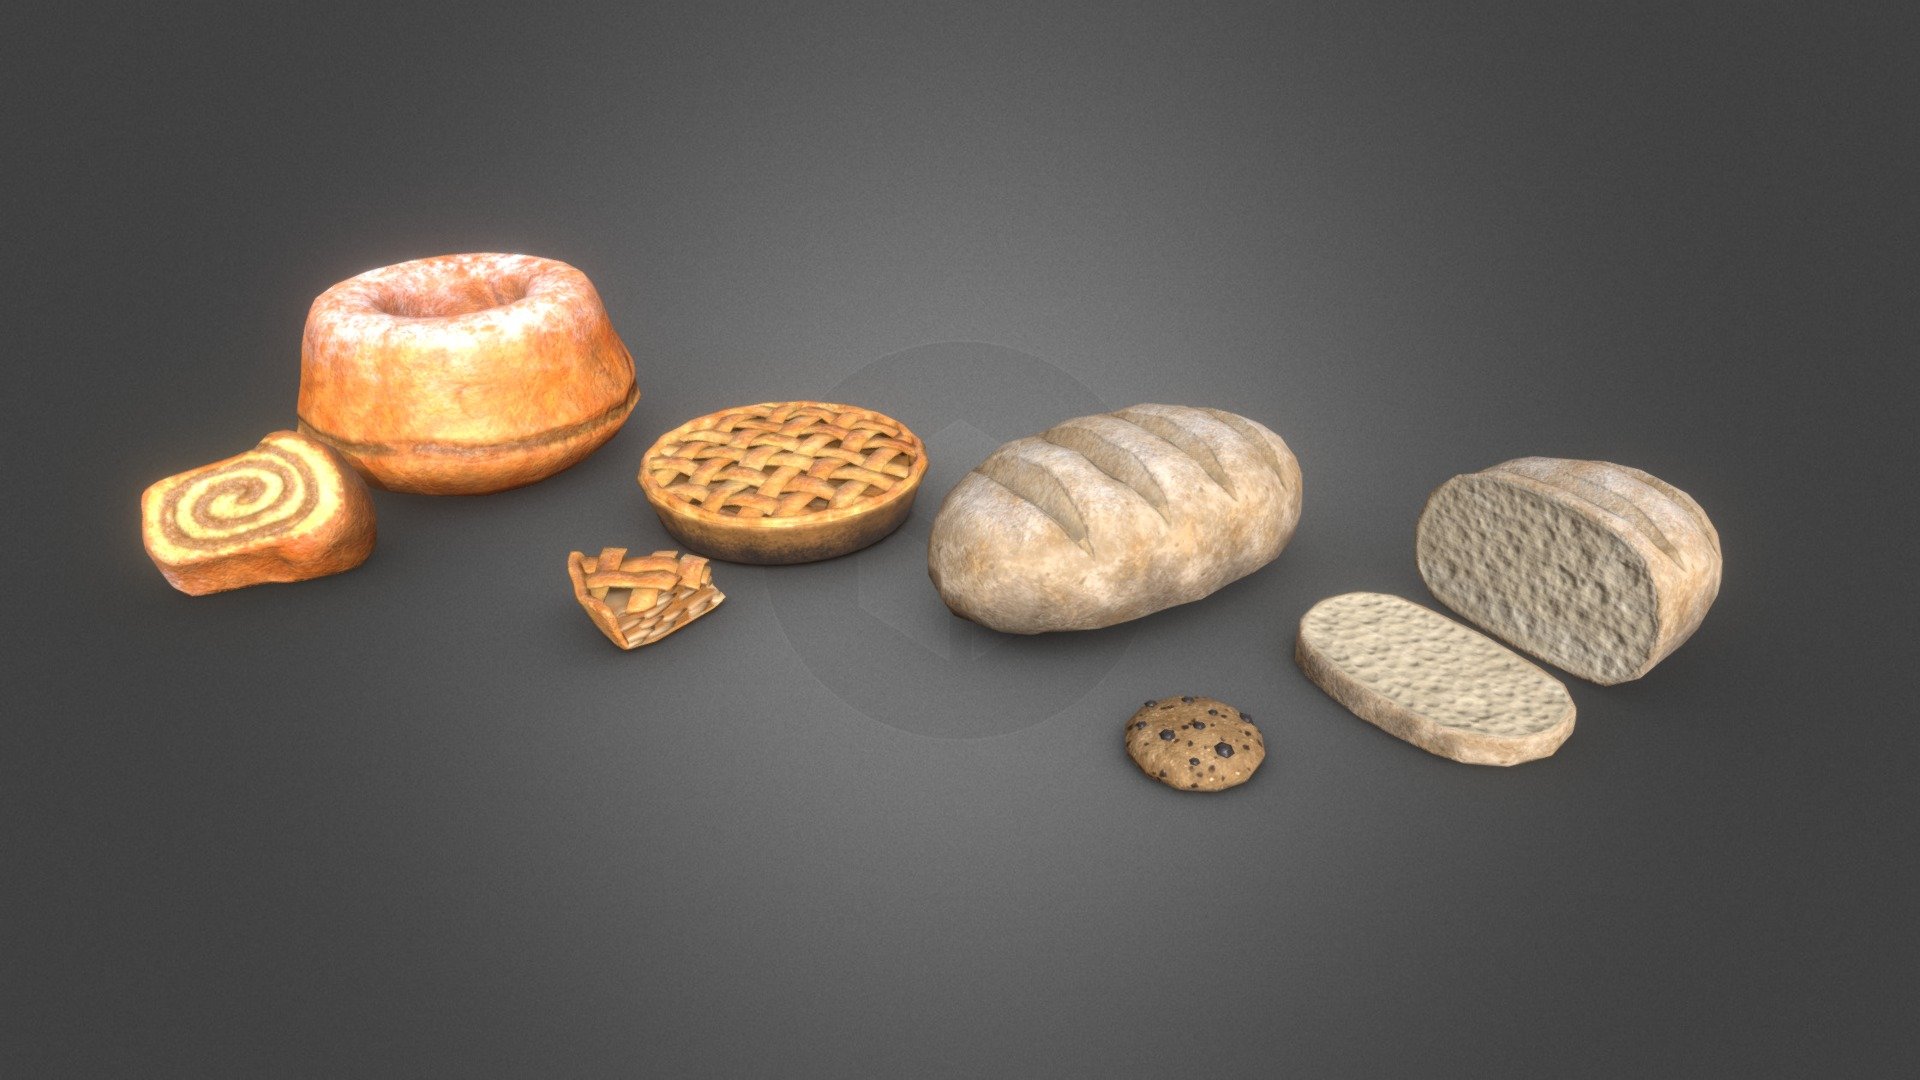 Low poly PBR 8 piece set of baked goods.

Features:




Including bread with whole loaf, half loaf and slice variant,

Including Cookie,

Including Pie with whole and piece variant,

Including traditional Potica with whole and piece variant,

Great for renders as well as game assets

For support or other information please send us an e-mail at info@sunbox.games

Check out our other work at sunbox.games - Baked Goods - Bread Cookie Pie Potica - Buy Royalty Free 3D model by Sunbox Games (@sunboxgames) 3d model